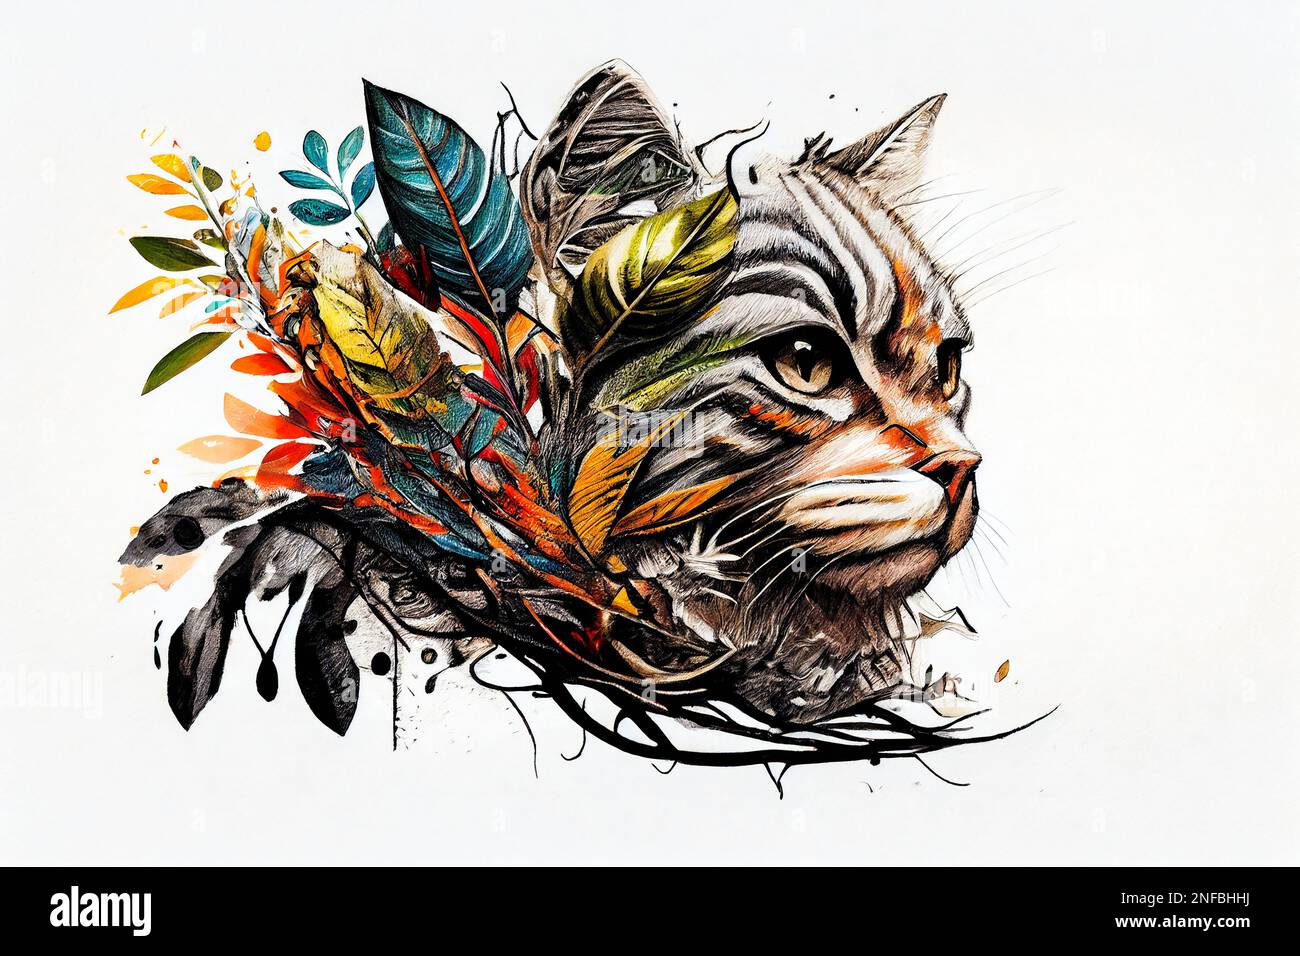 Artistic Cat Tattoo Design With Innovative Plant Art on White Background Stock Photo - Alamy